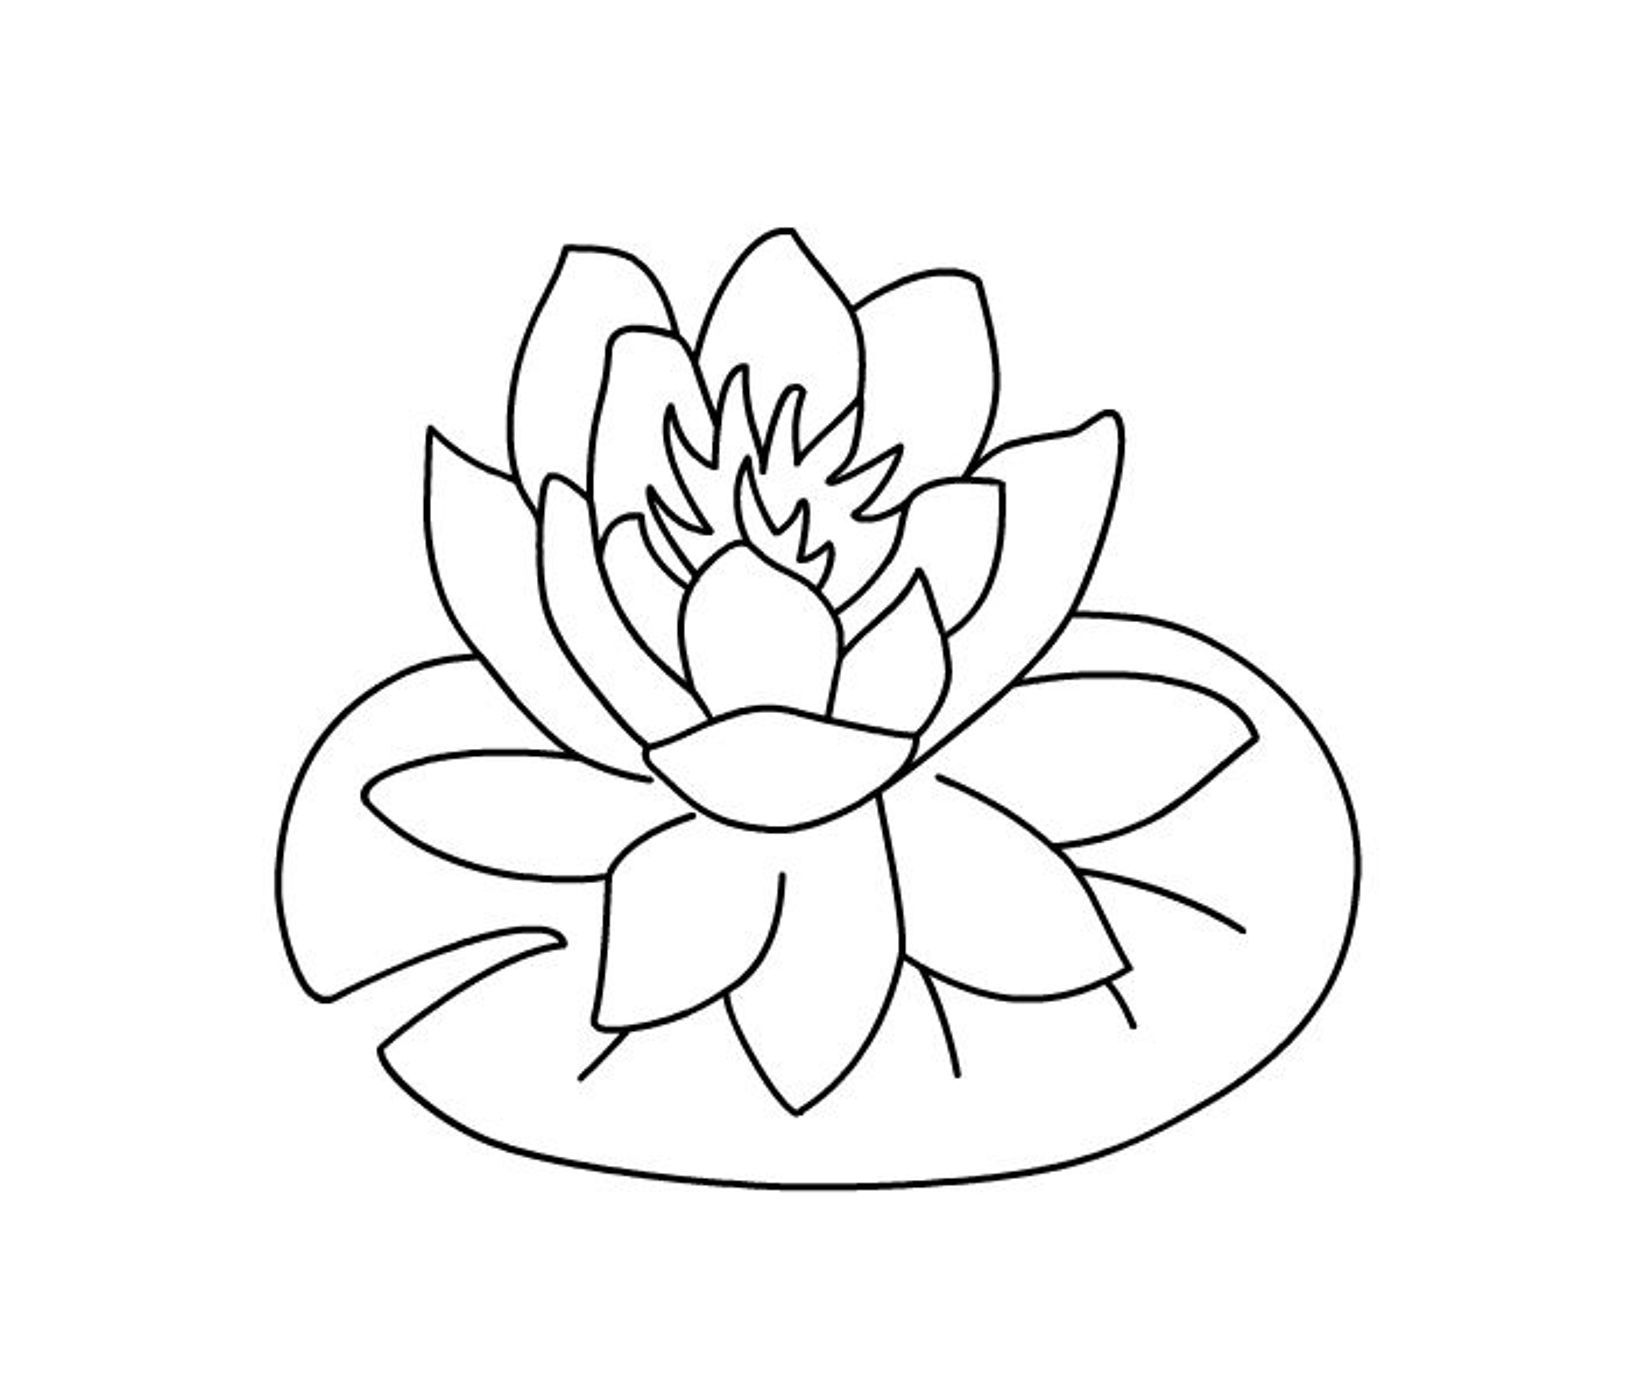 Hibiscus Flowers Coloring Pages | Flower Coloring pages of ...